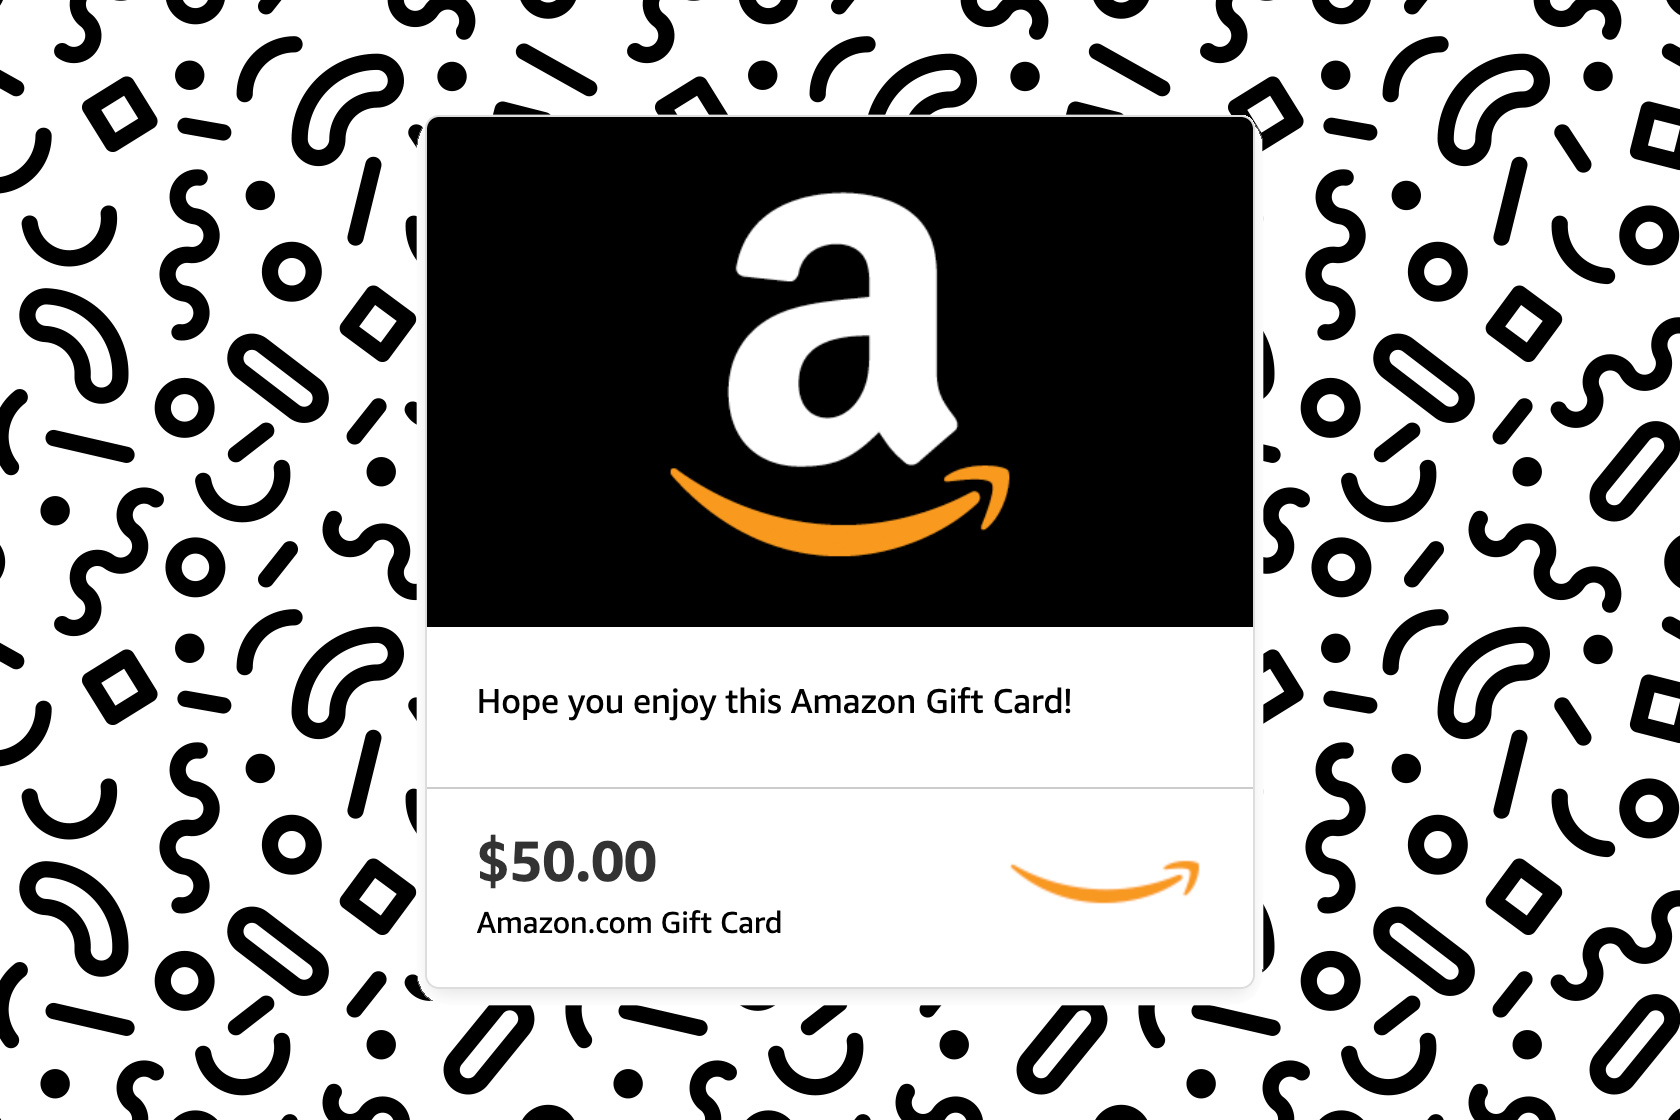 Amazon S Handing Out 10 When You Buy A 40 Gift Card - roblox gift cards amazon gift ideas